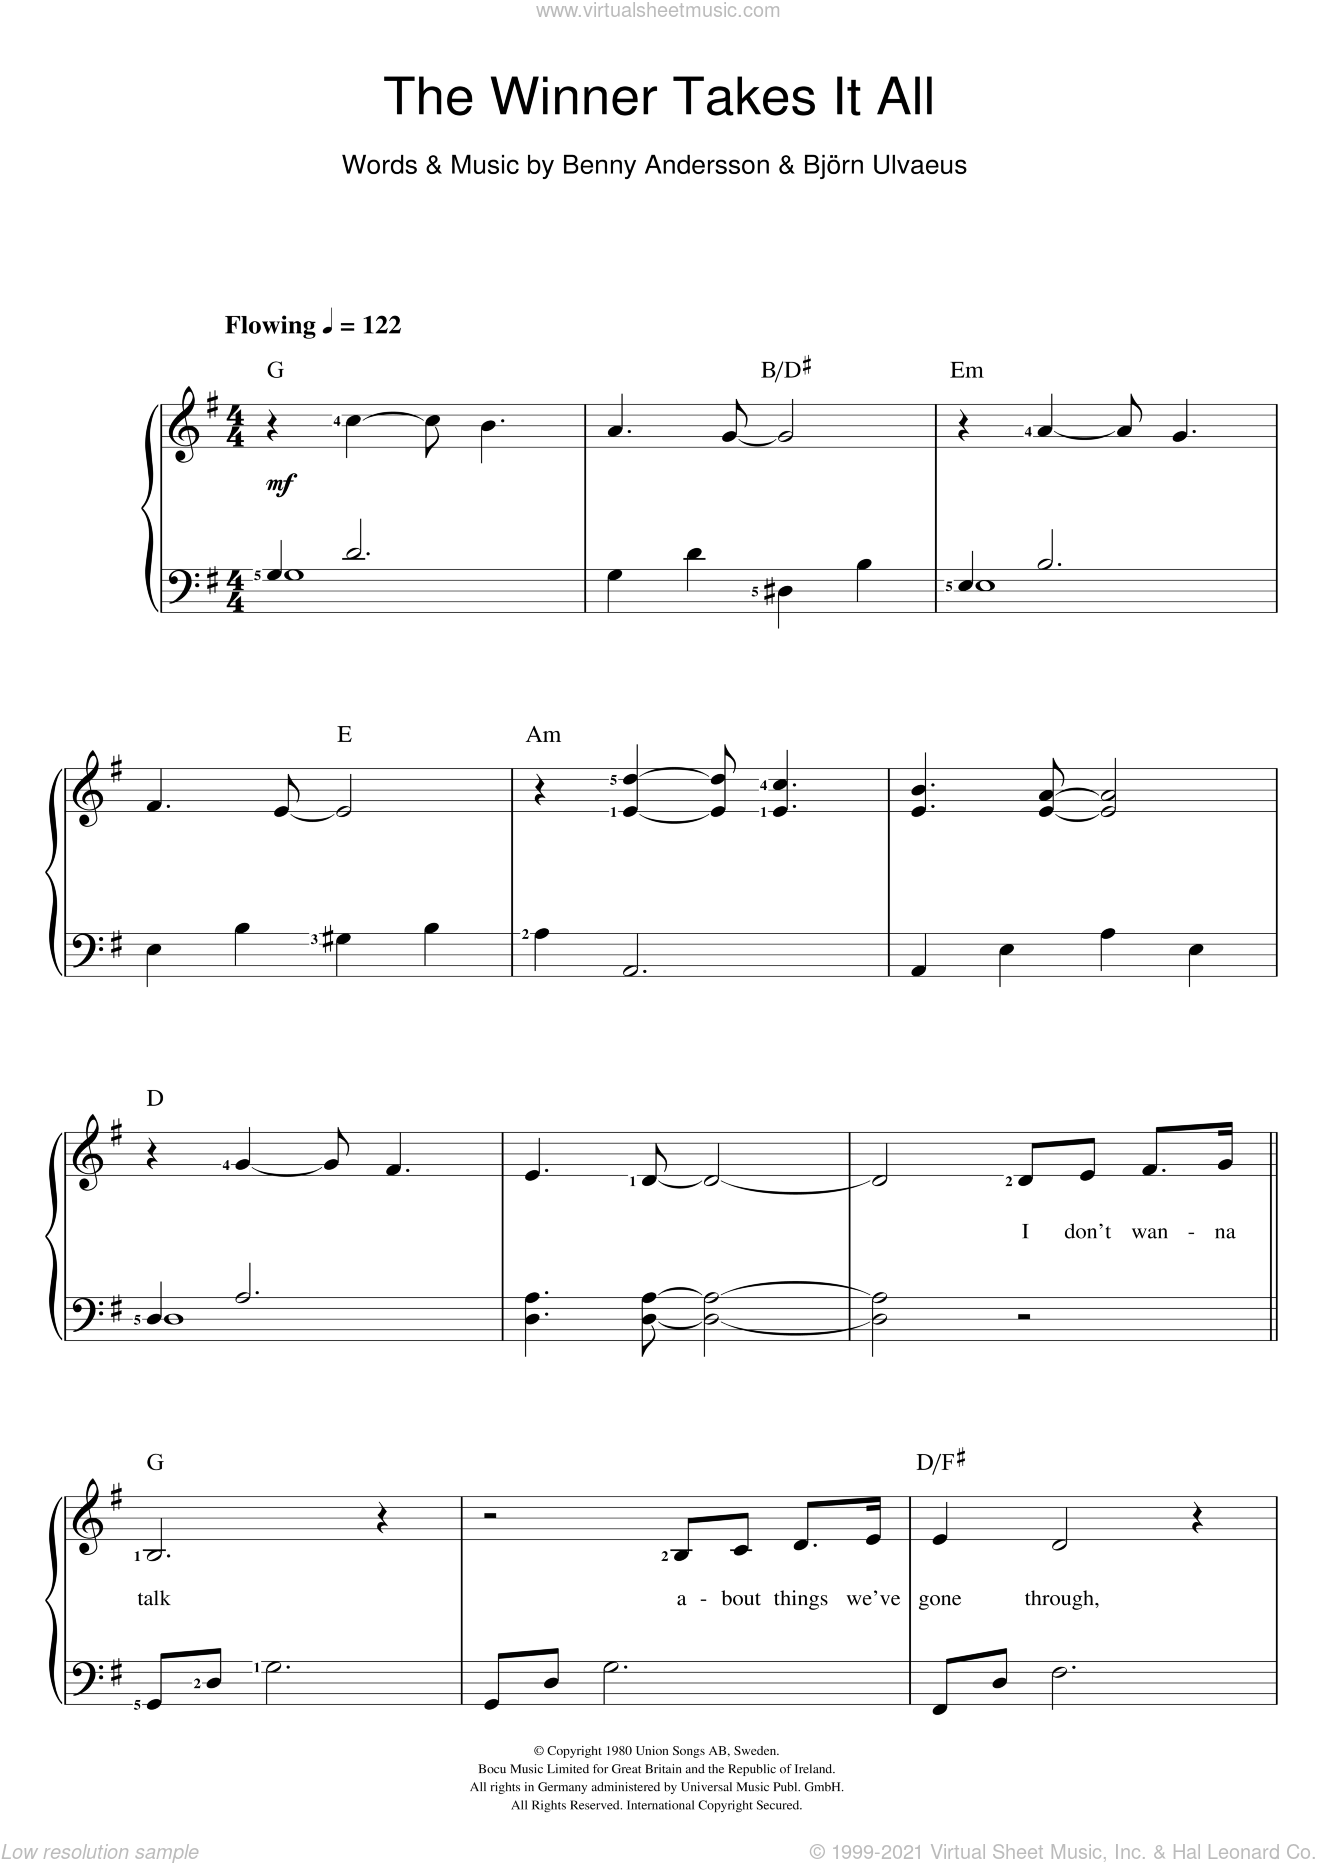 ABBA - The Winner Takes It All sheet music for voice and piano